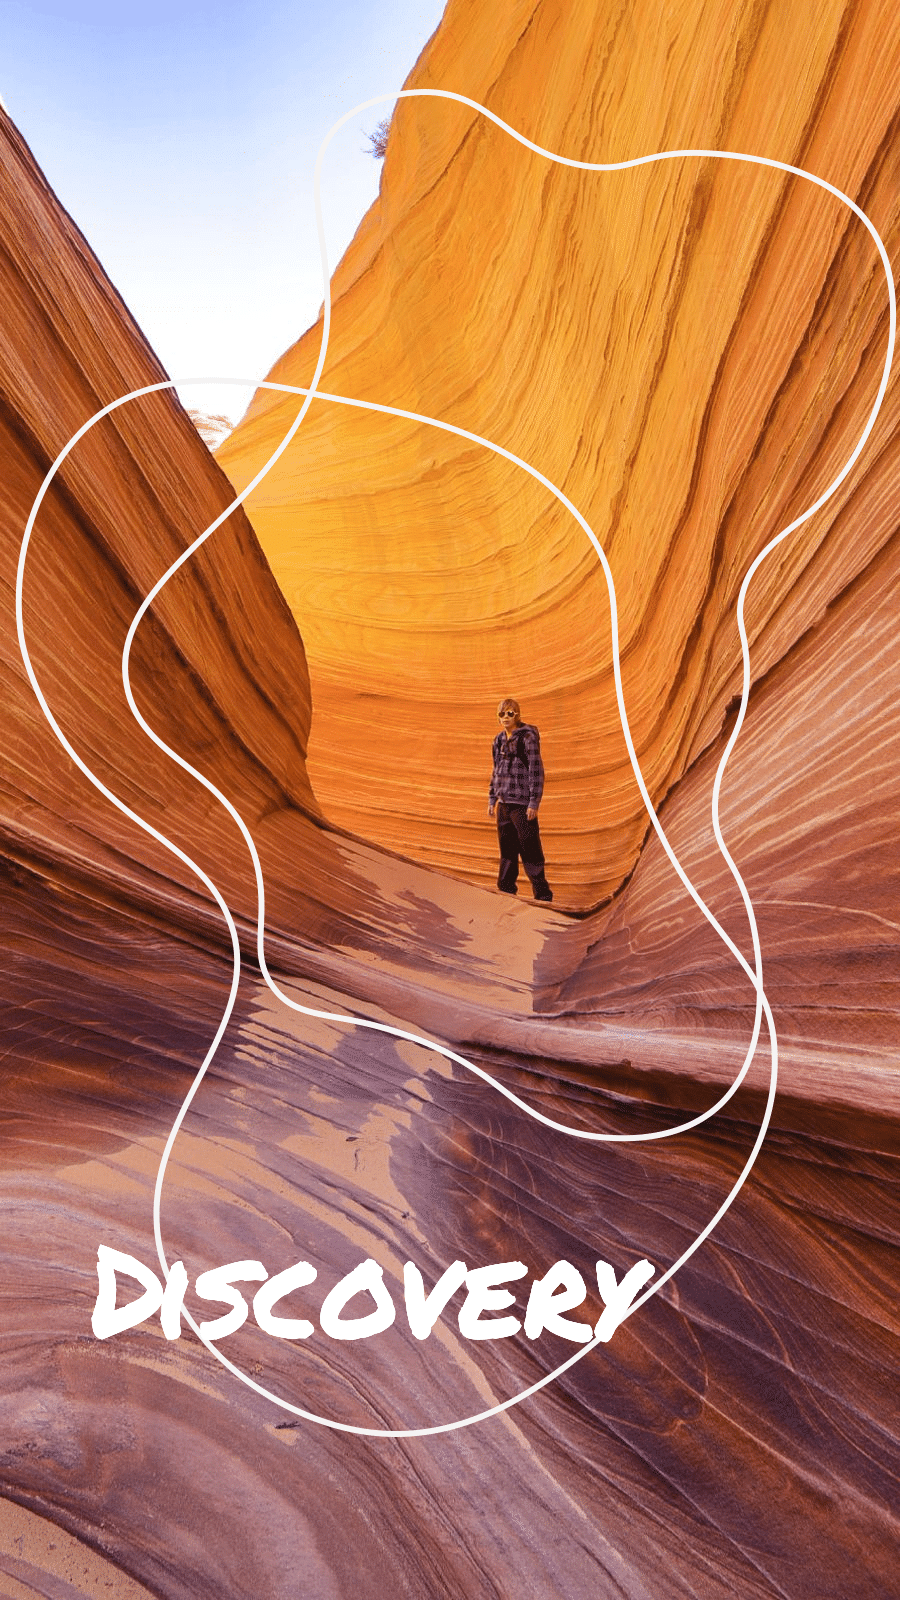 Travel Record Canyon Photo Art Simple Fashion Style Poster Instagram Story预览效果